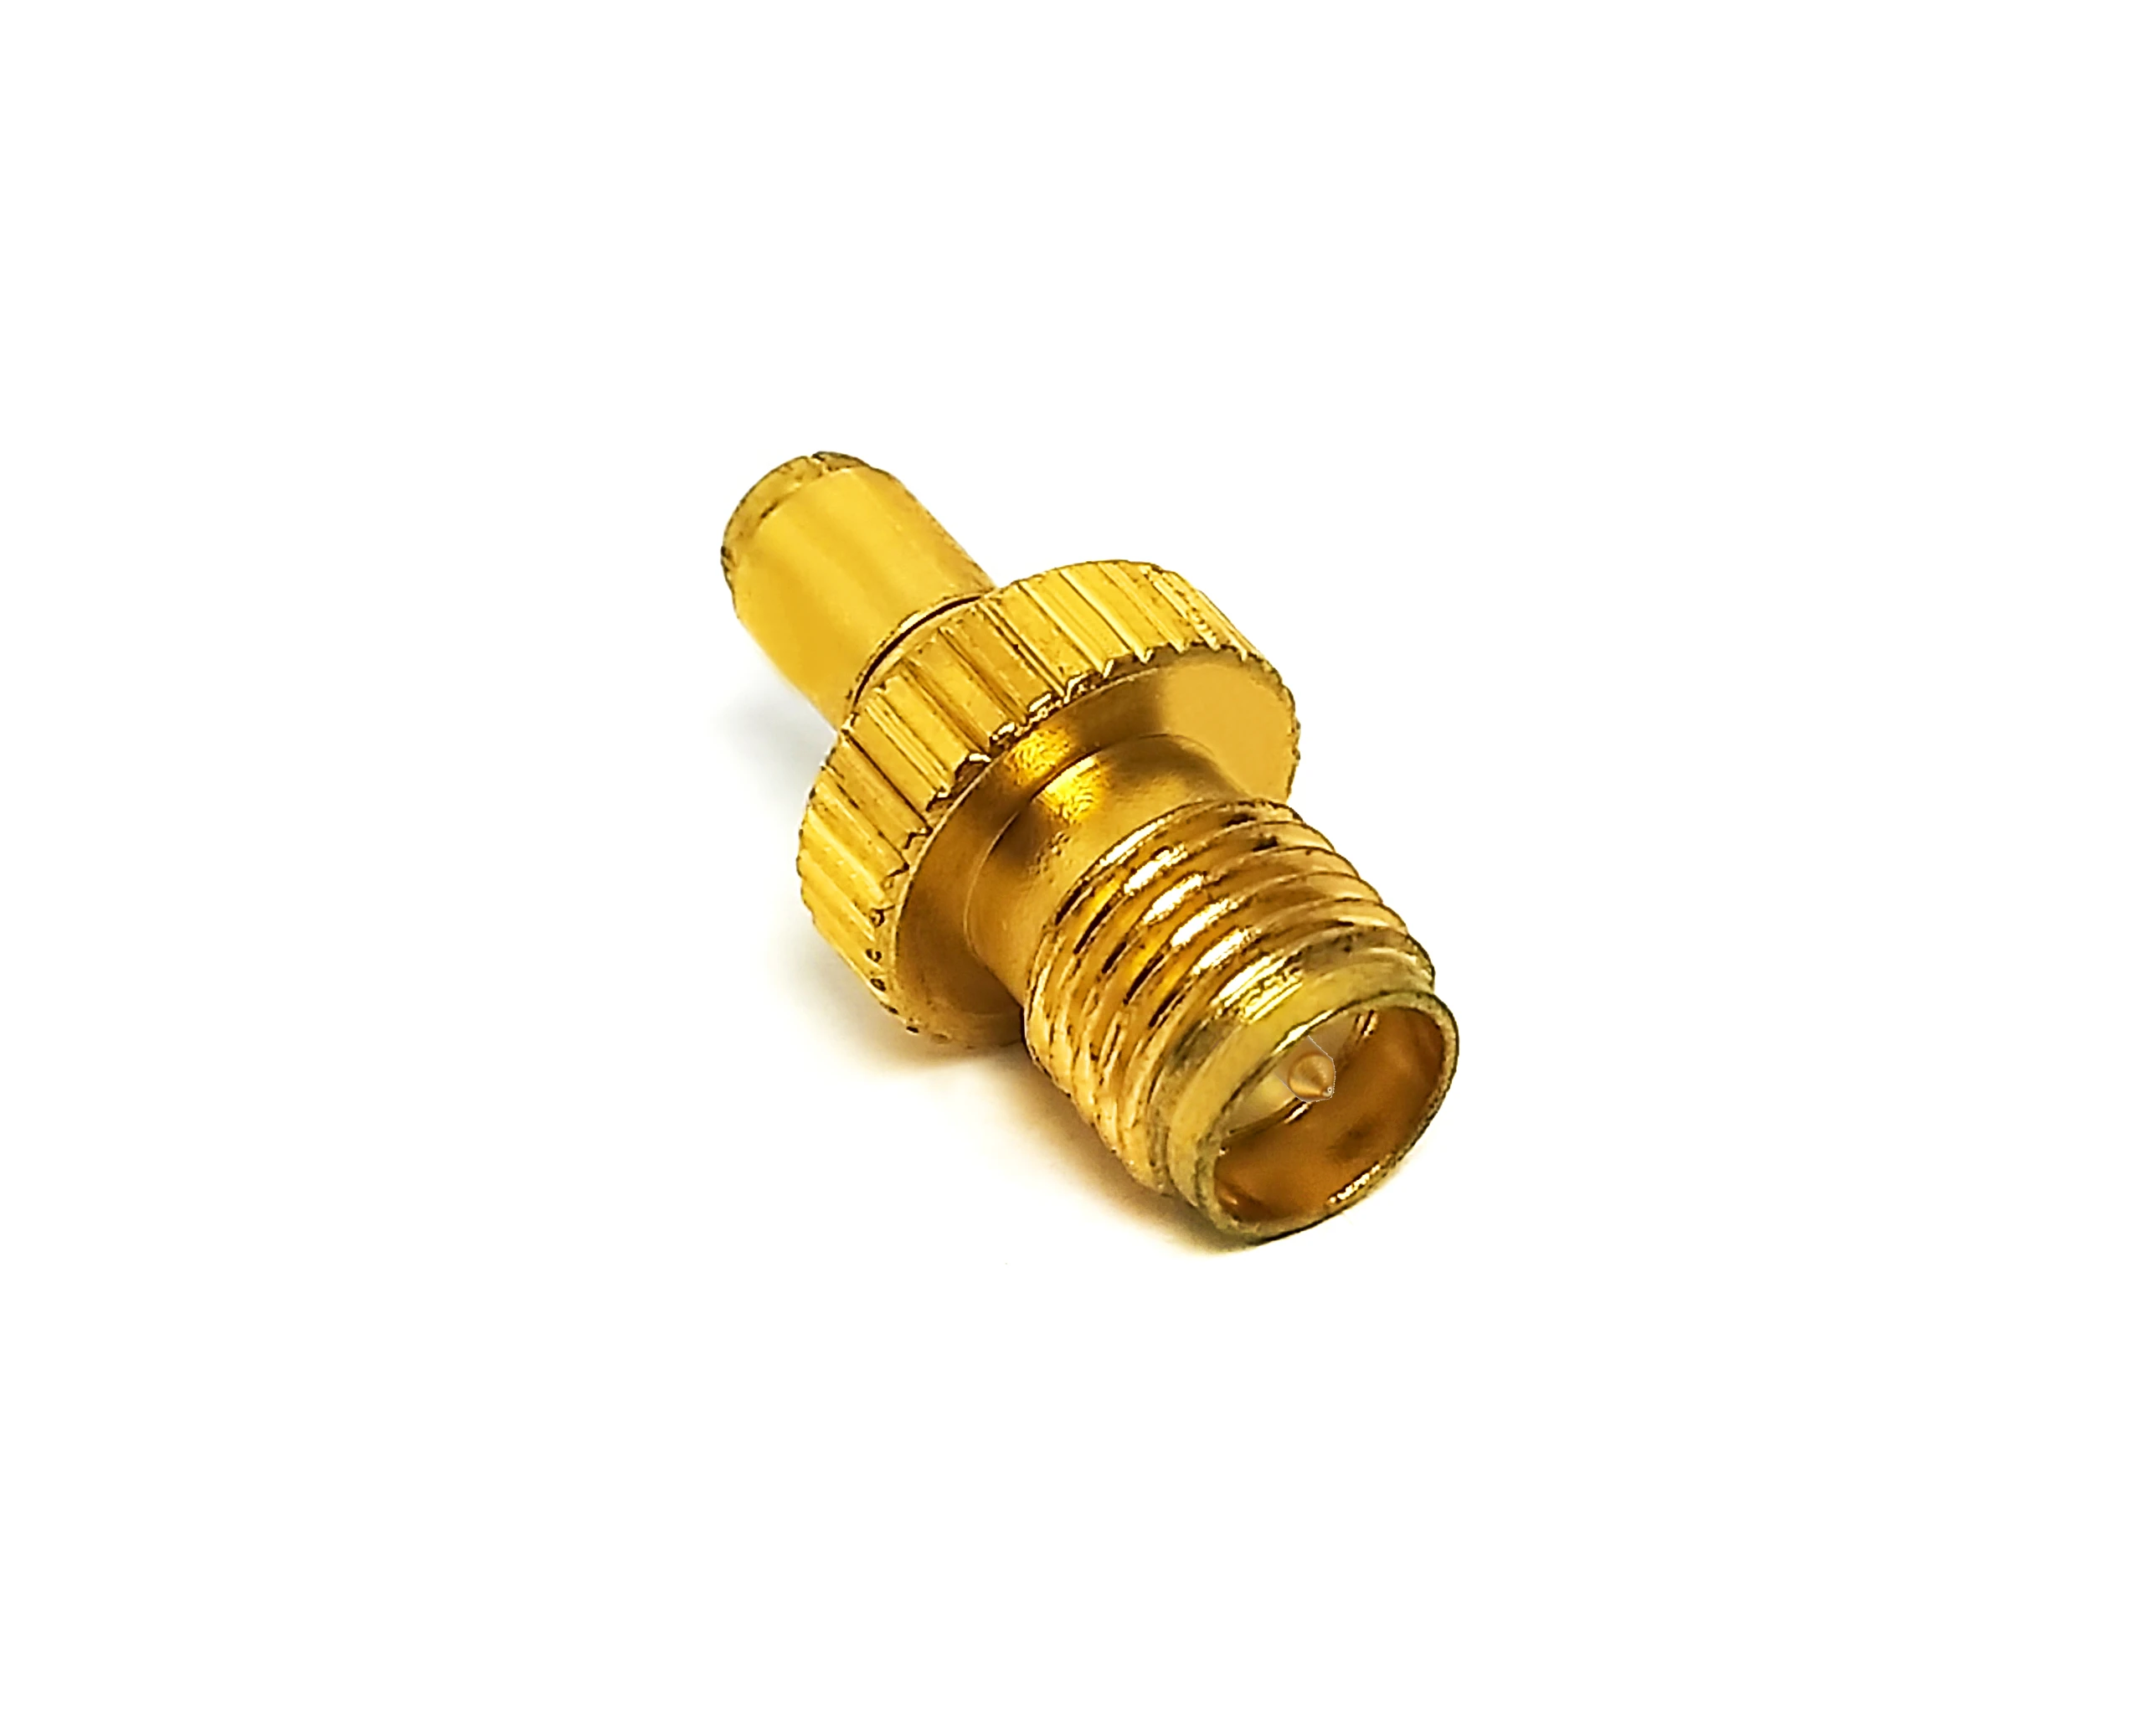 Reversed Polarity SMA Female RP SMA Jack To TS9 Male Gold Plated Adapter Connector factory